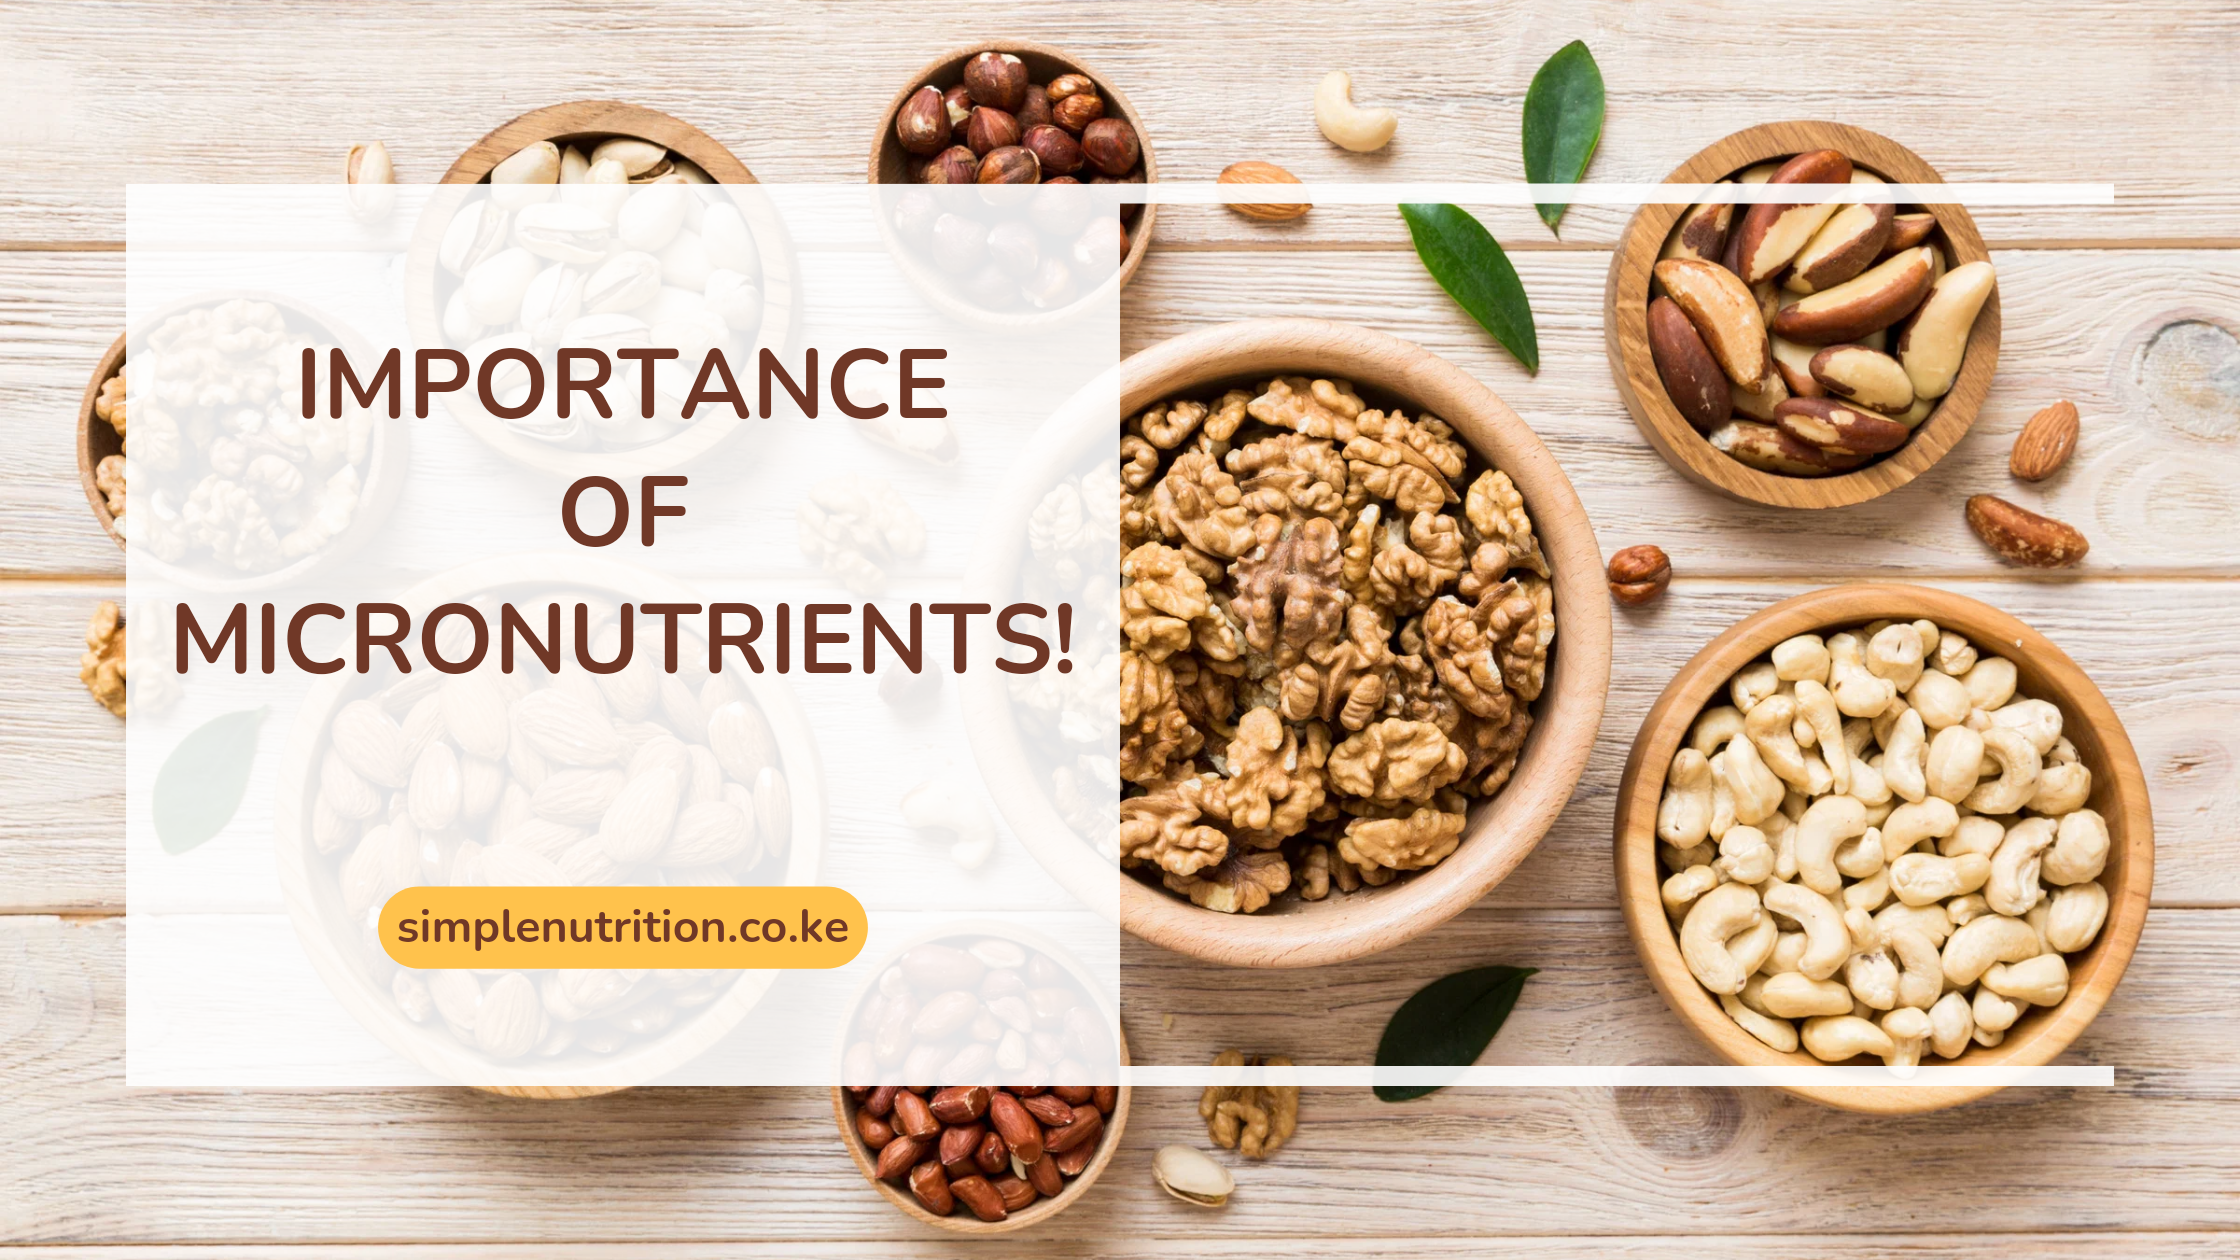 Importance of micronutrients!